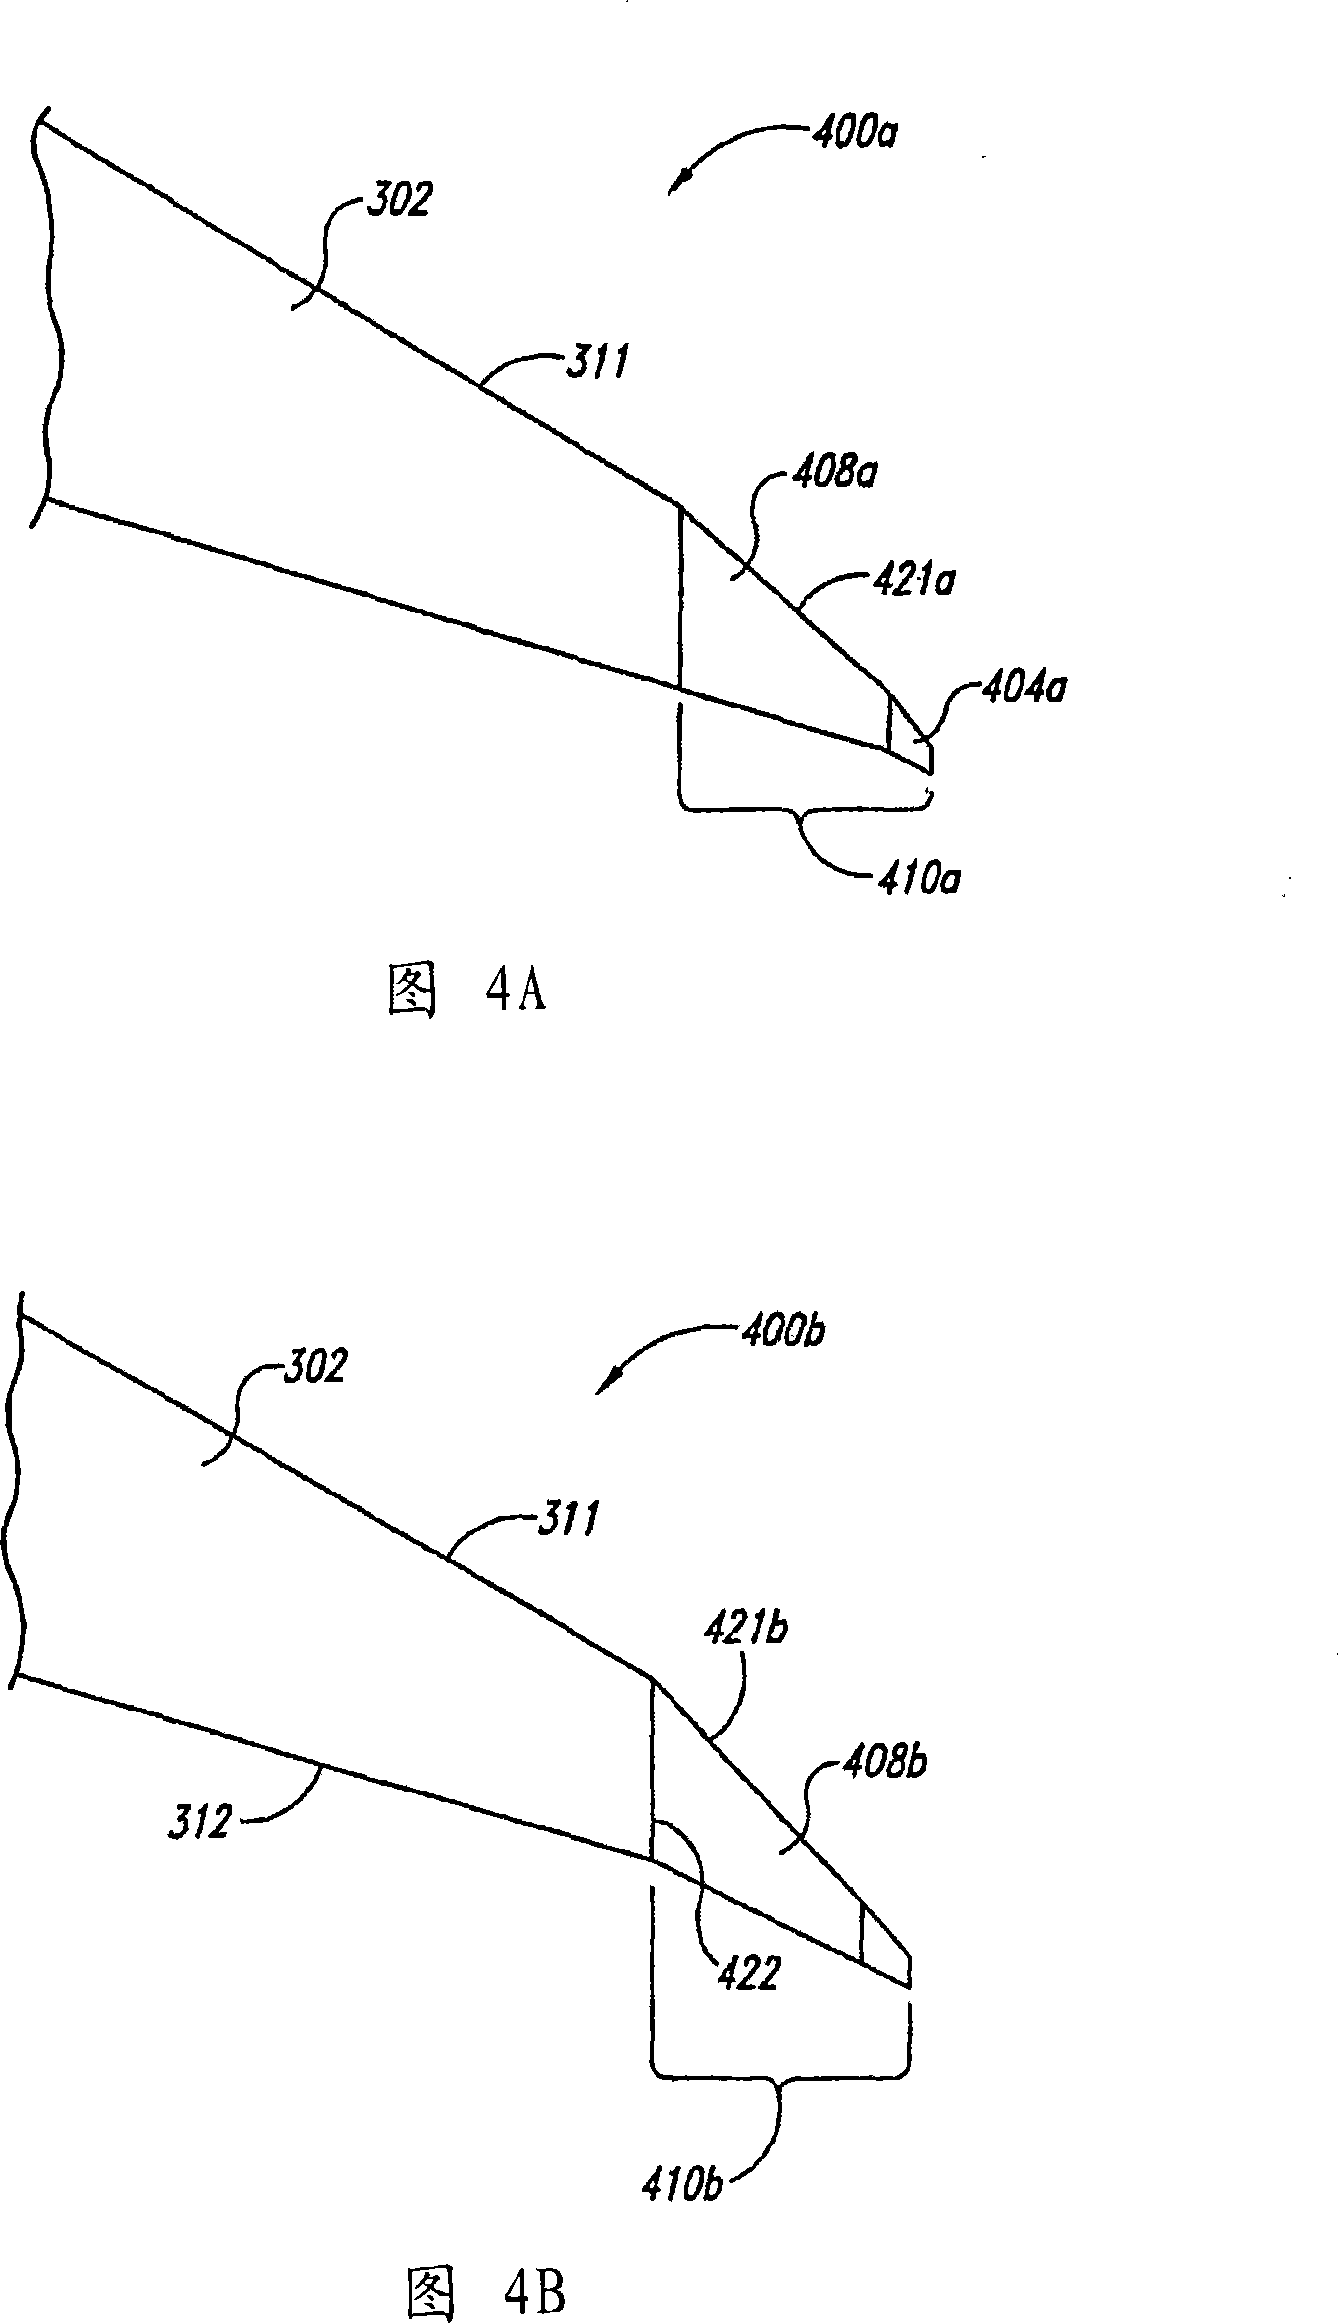 Integrated wingtip extensions for jet transport aircraft and other types of aircraft